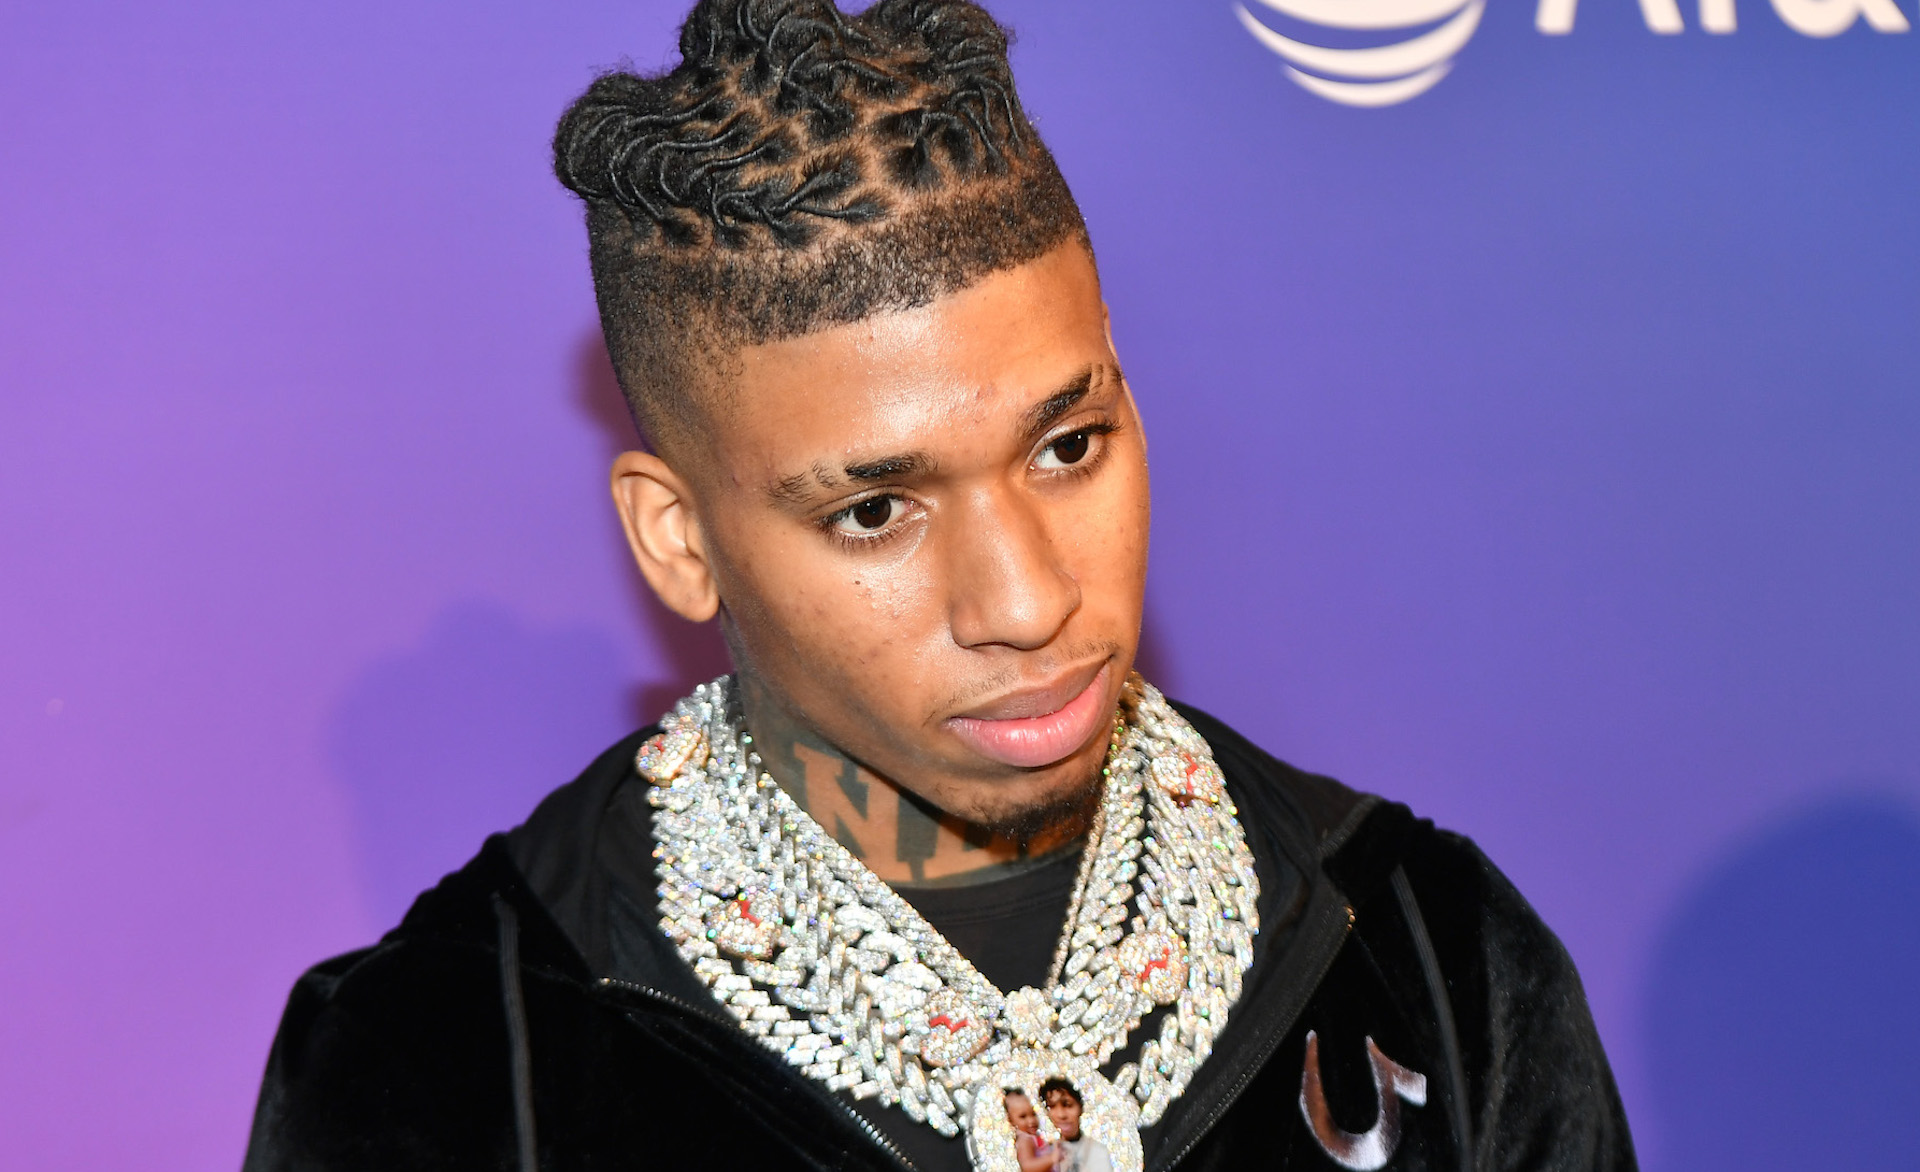 NLE Choppa Implies Hed Have a Threesome With Saweetie and His Girlfriend If “Icy Girl” Rapper Approached Him Complex photo